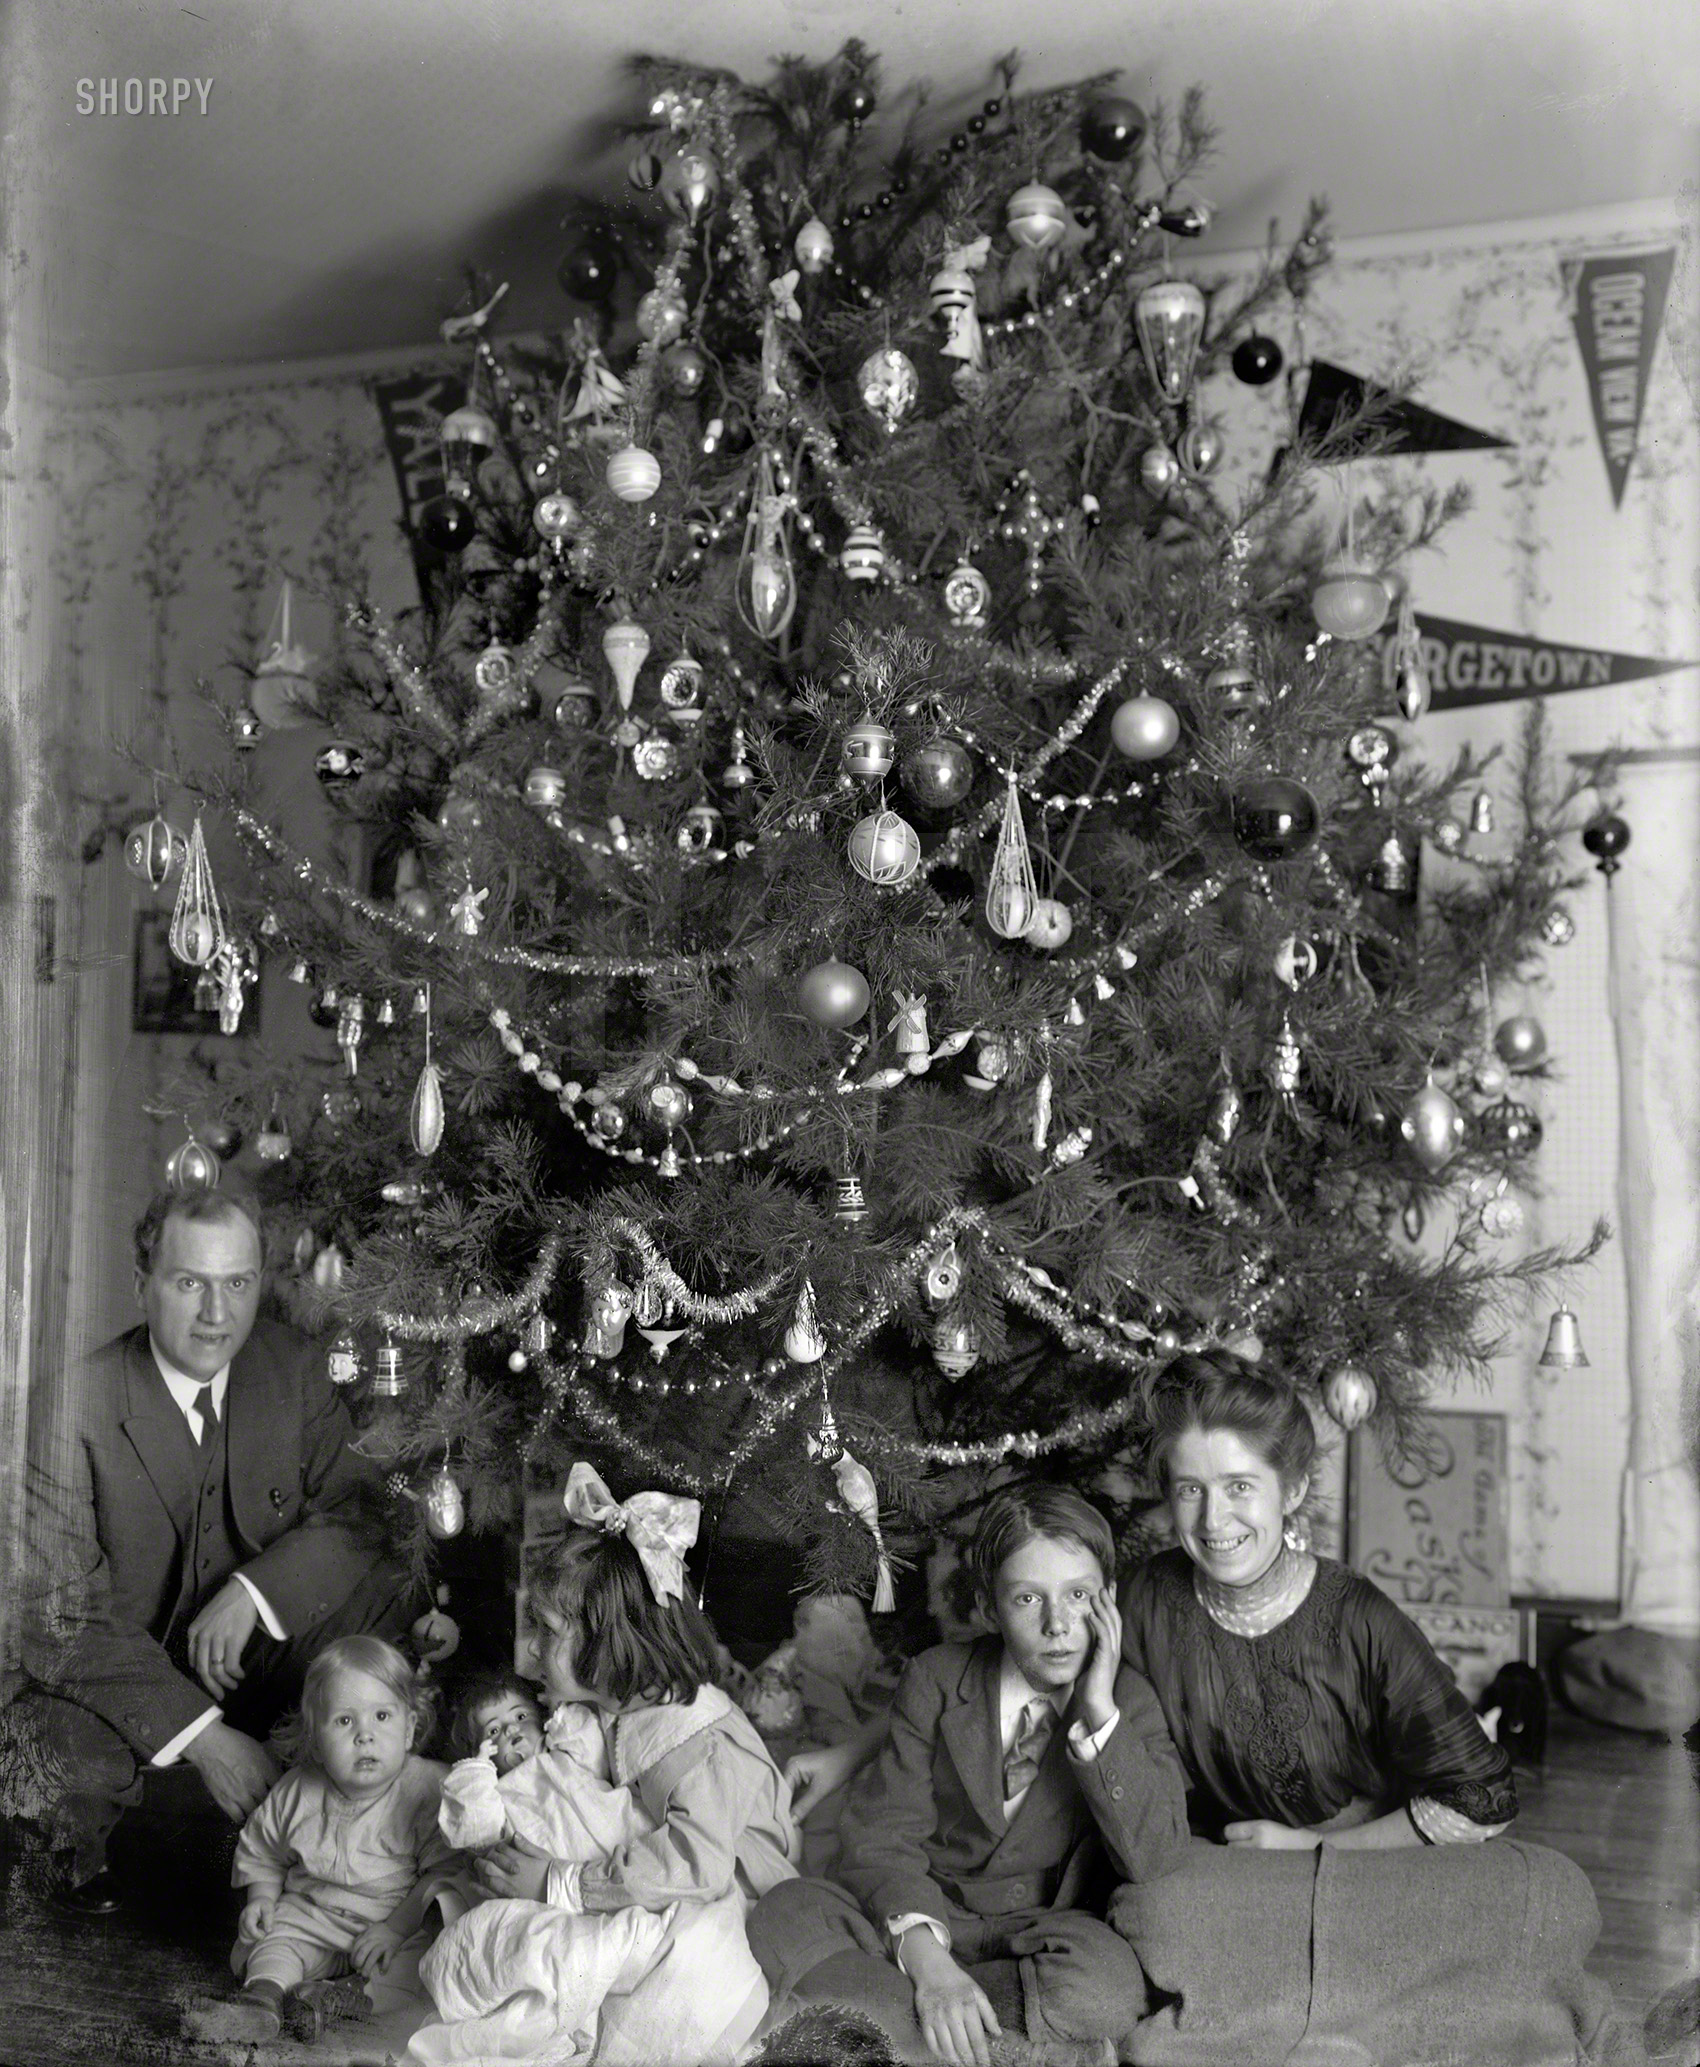 &nbsp; &nbsp; &nbsp; &nbsp; Our ninth annual holiday greeting from the family of Washington lawyer Raymond Dickey, who has been welcoming us into his home since 1912 or 2008, depending on how you look at it. This marks the last of the series, unless we find some more in our stocking come Friday. MERRY CHRISTMAS TO ALL.
"Dickey family and Christmas tree, 1913." Looking a bit jollier than usual. National Photo Company Collection glass negative. View full size.